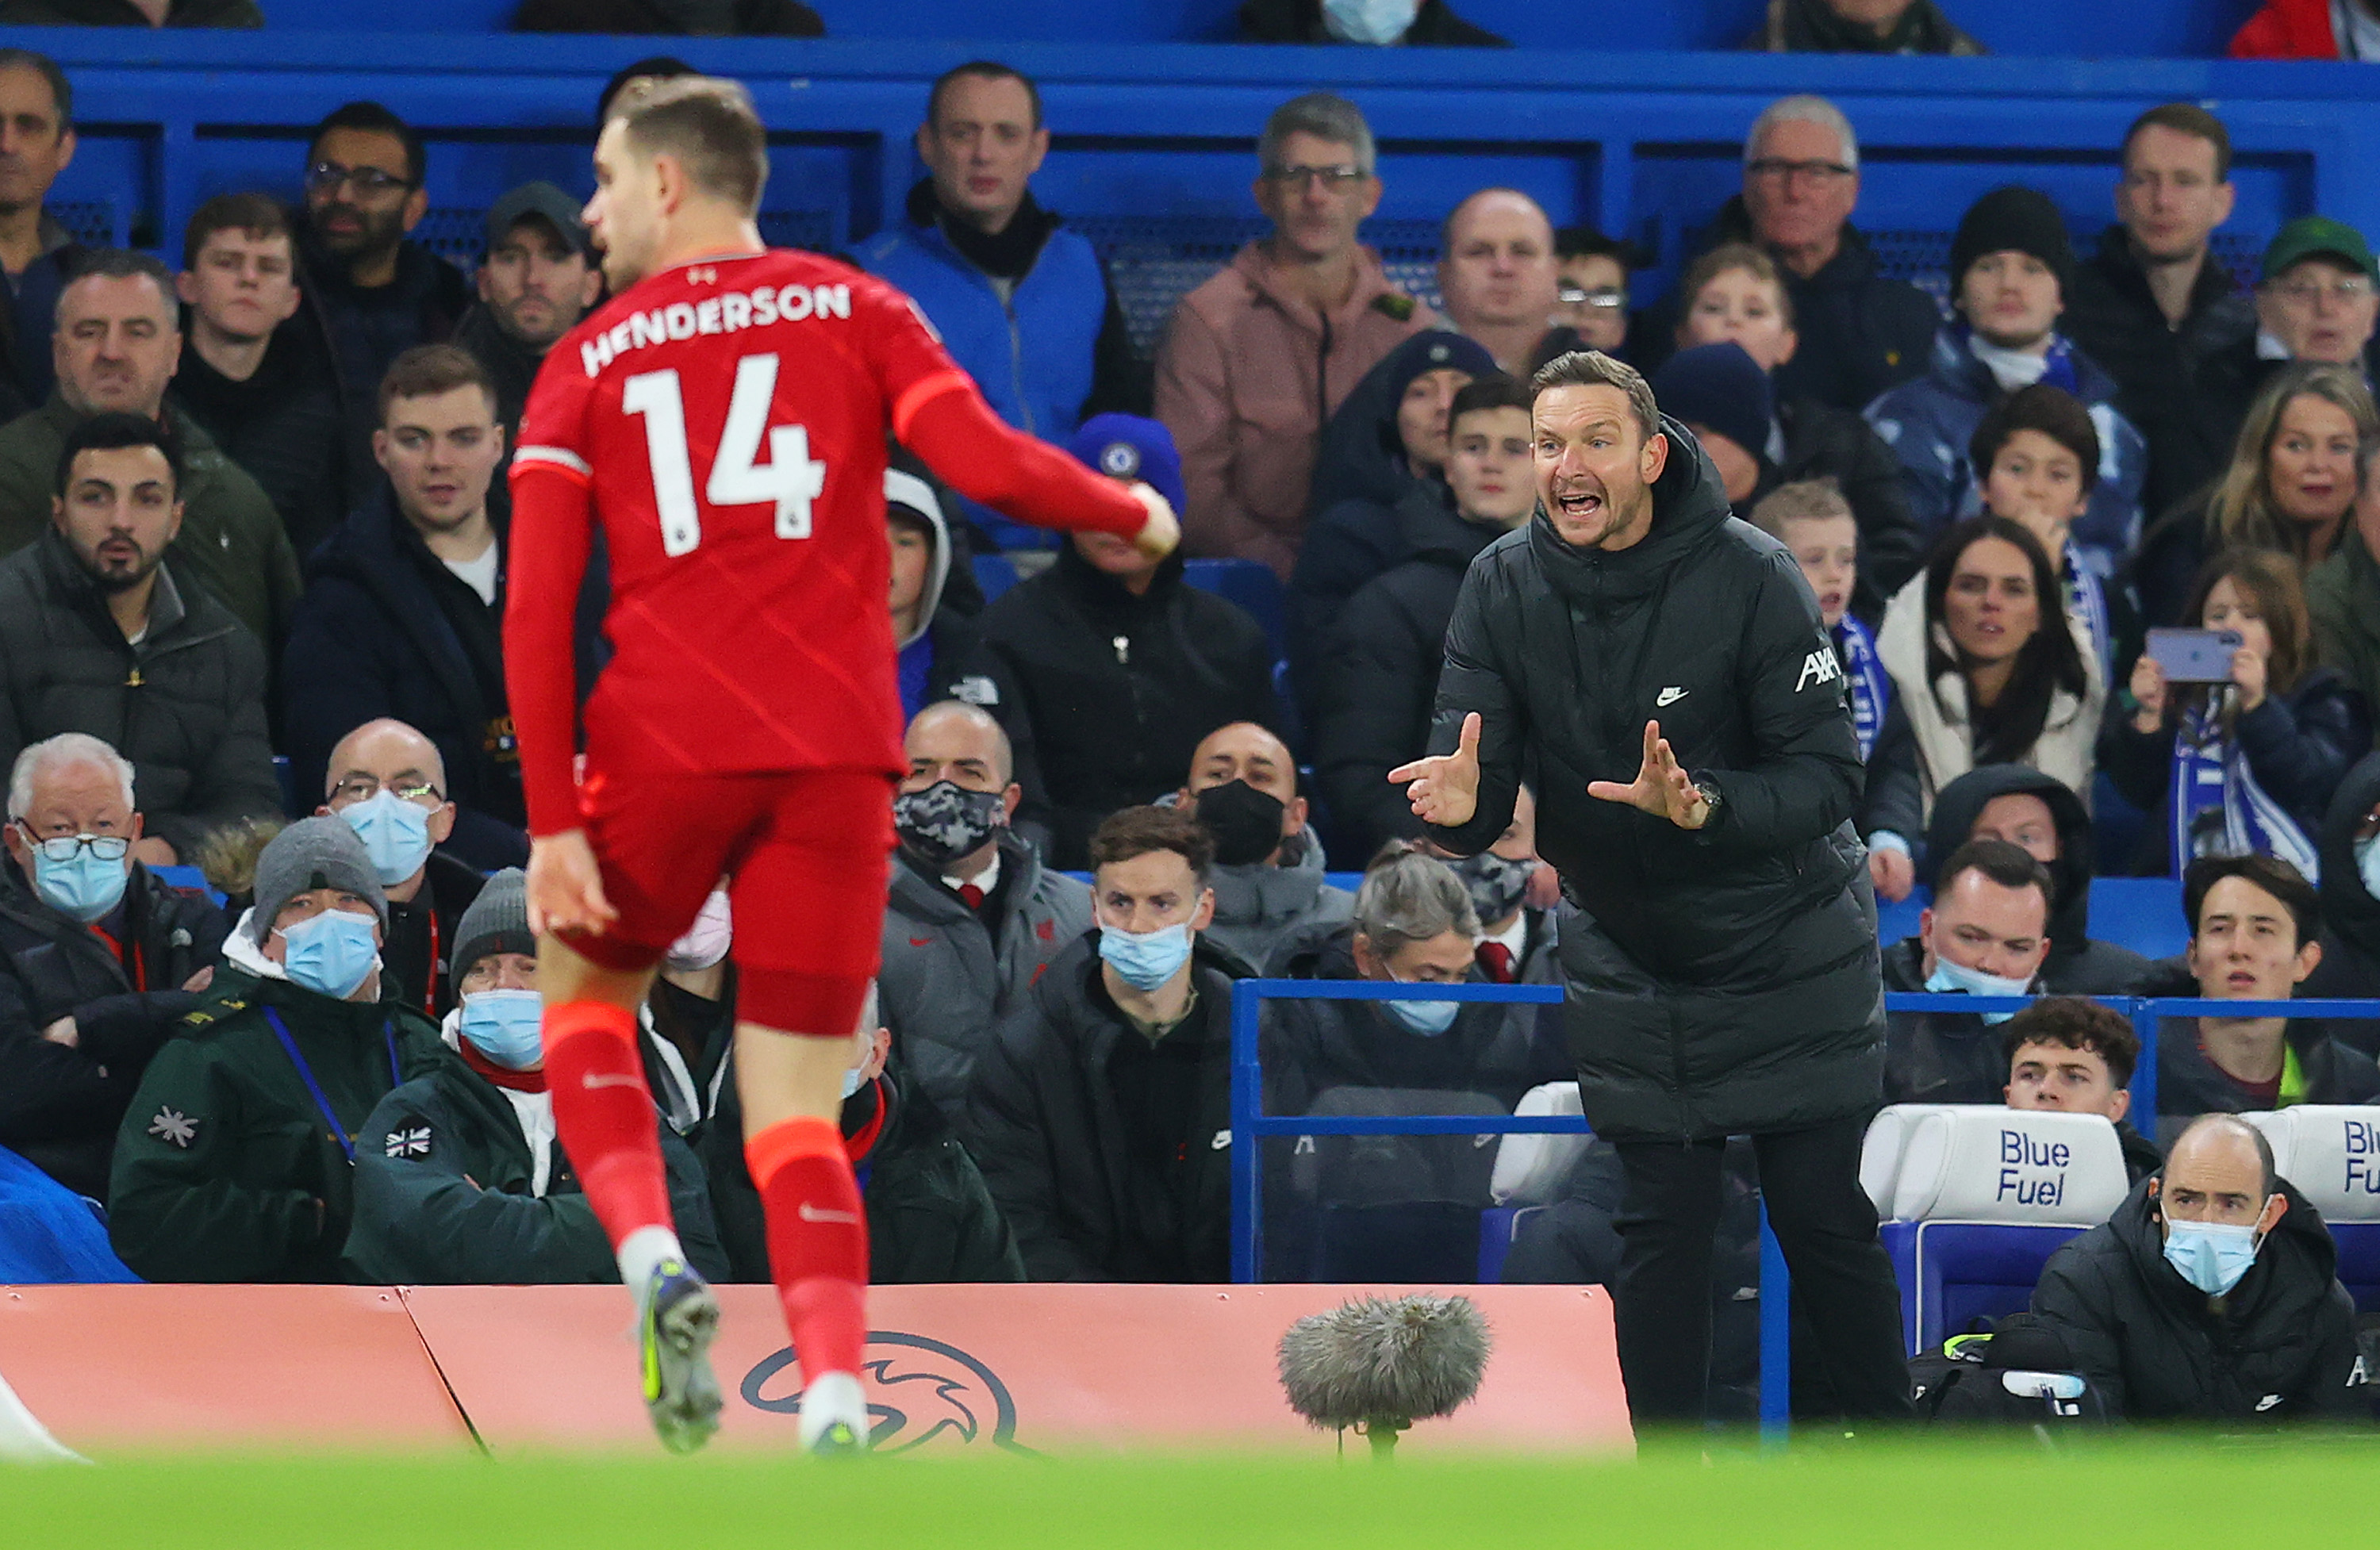 ‘It’s well and truly over’ – Jamie O’Hara’s honest verdict on the title race following Liverpool’s 2-2 draw at Stamford Bridge